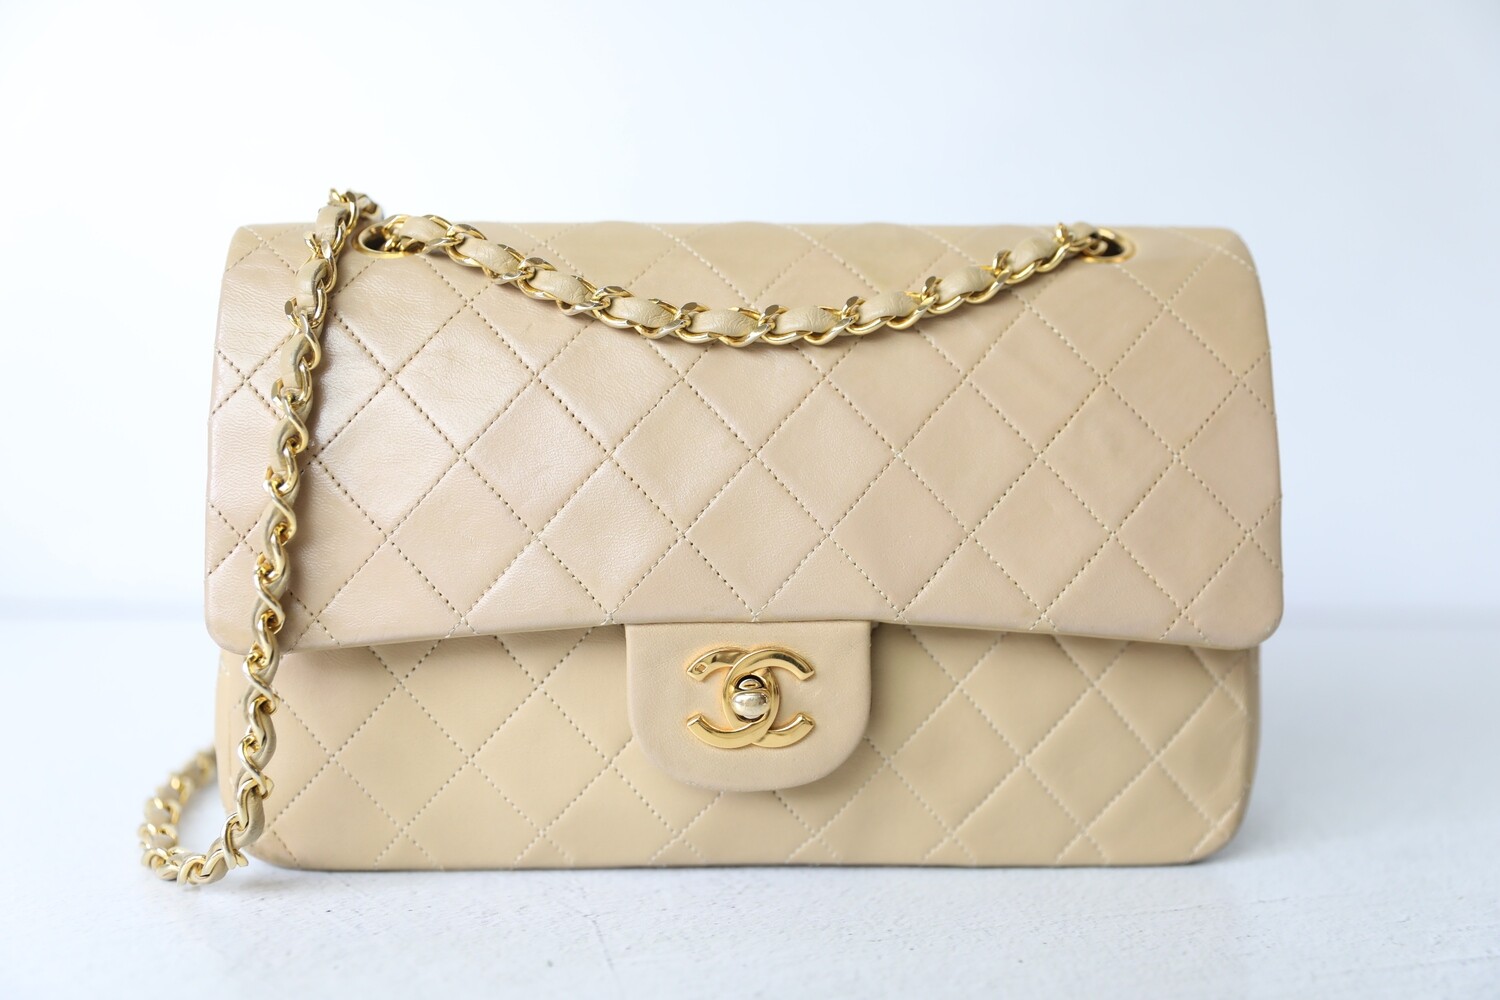 Chanel 22 Tote Medium, Pink Leather with Gold Hardware, Preowned in Dustbag  CMA001 - Julia Rose Boston